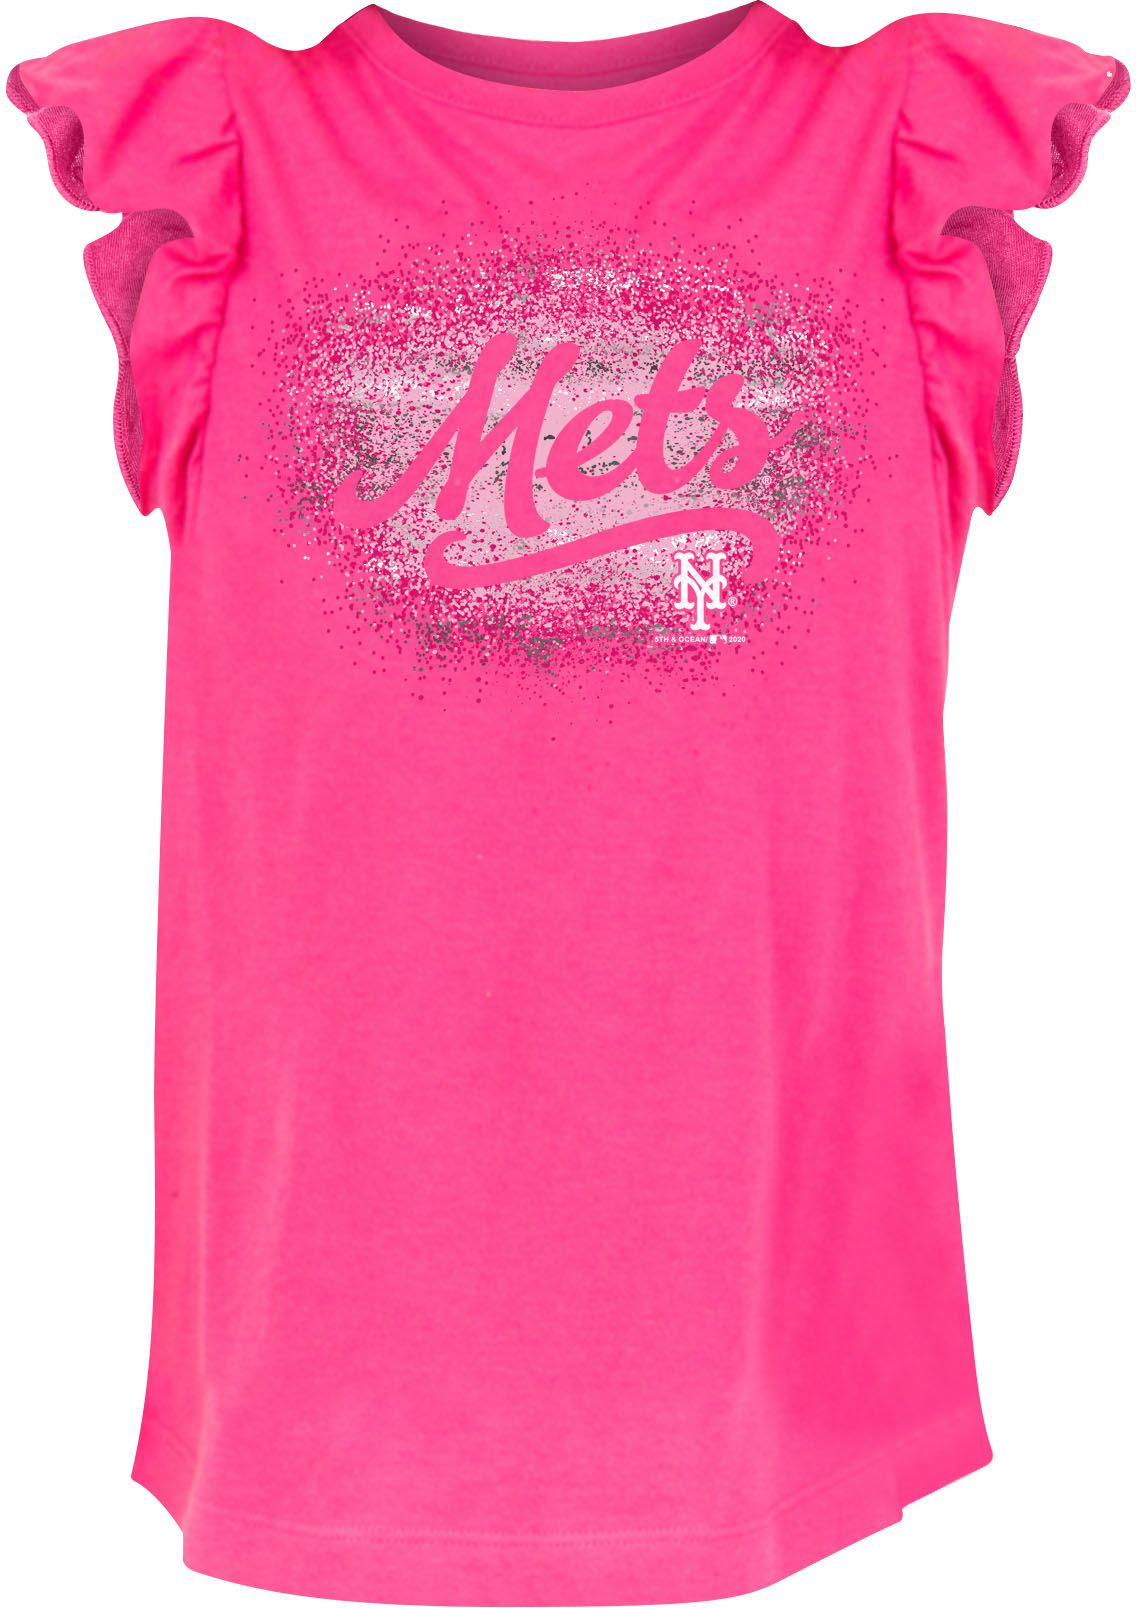 youth mets shirt